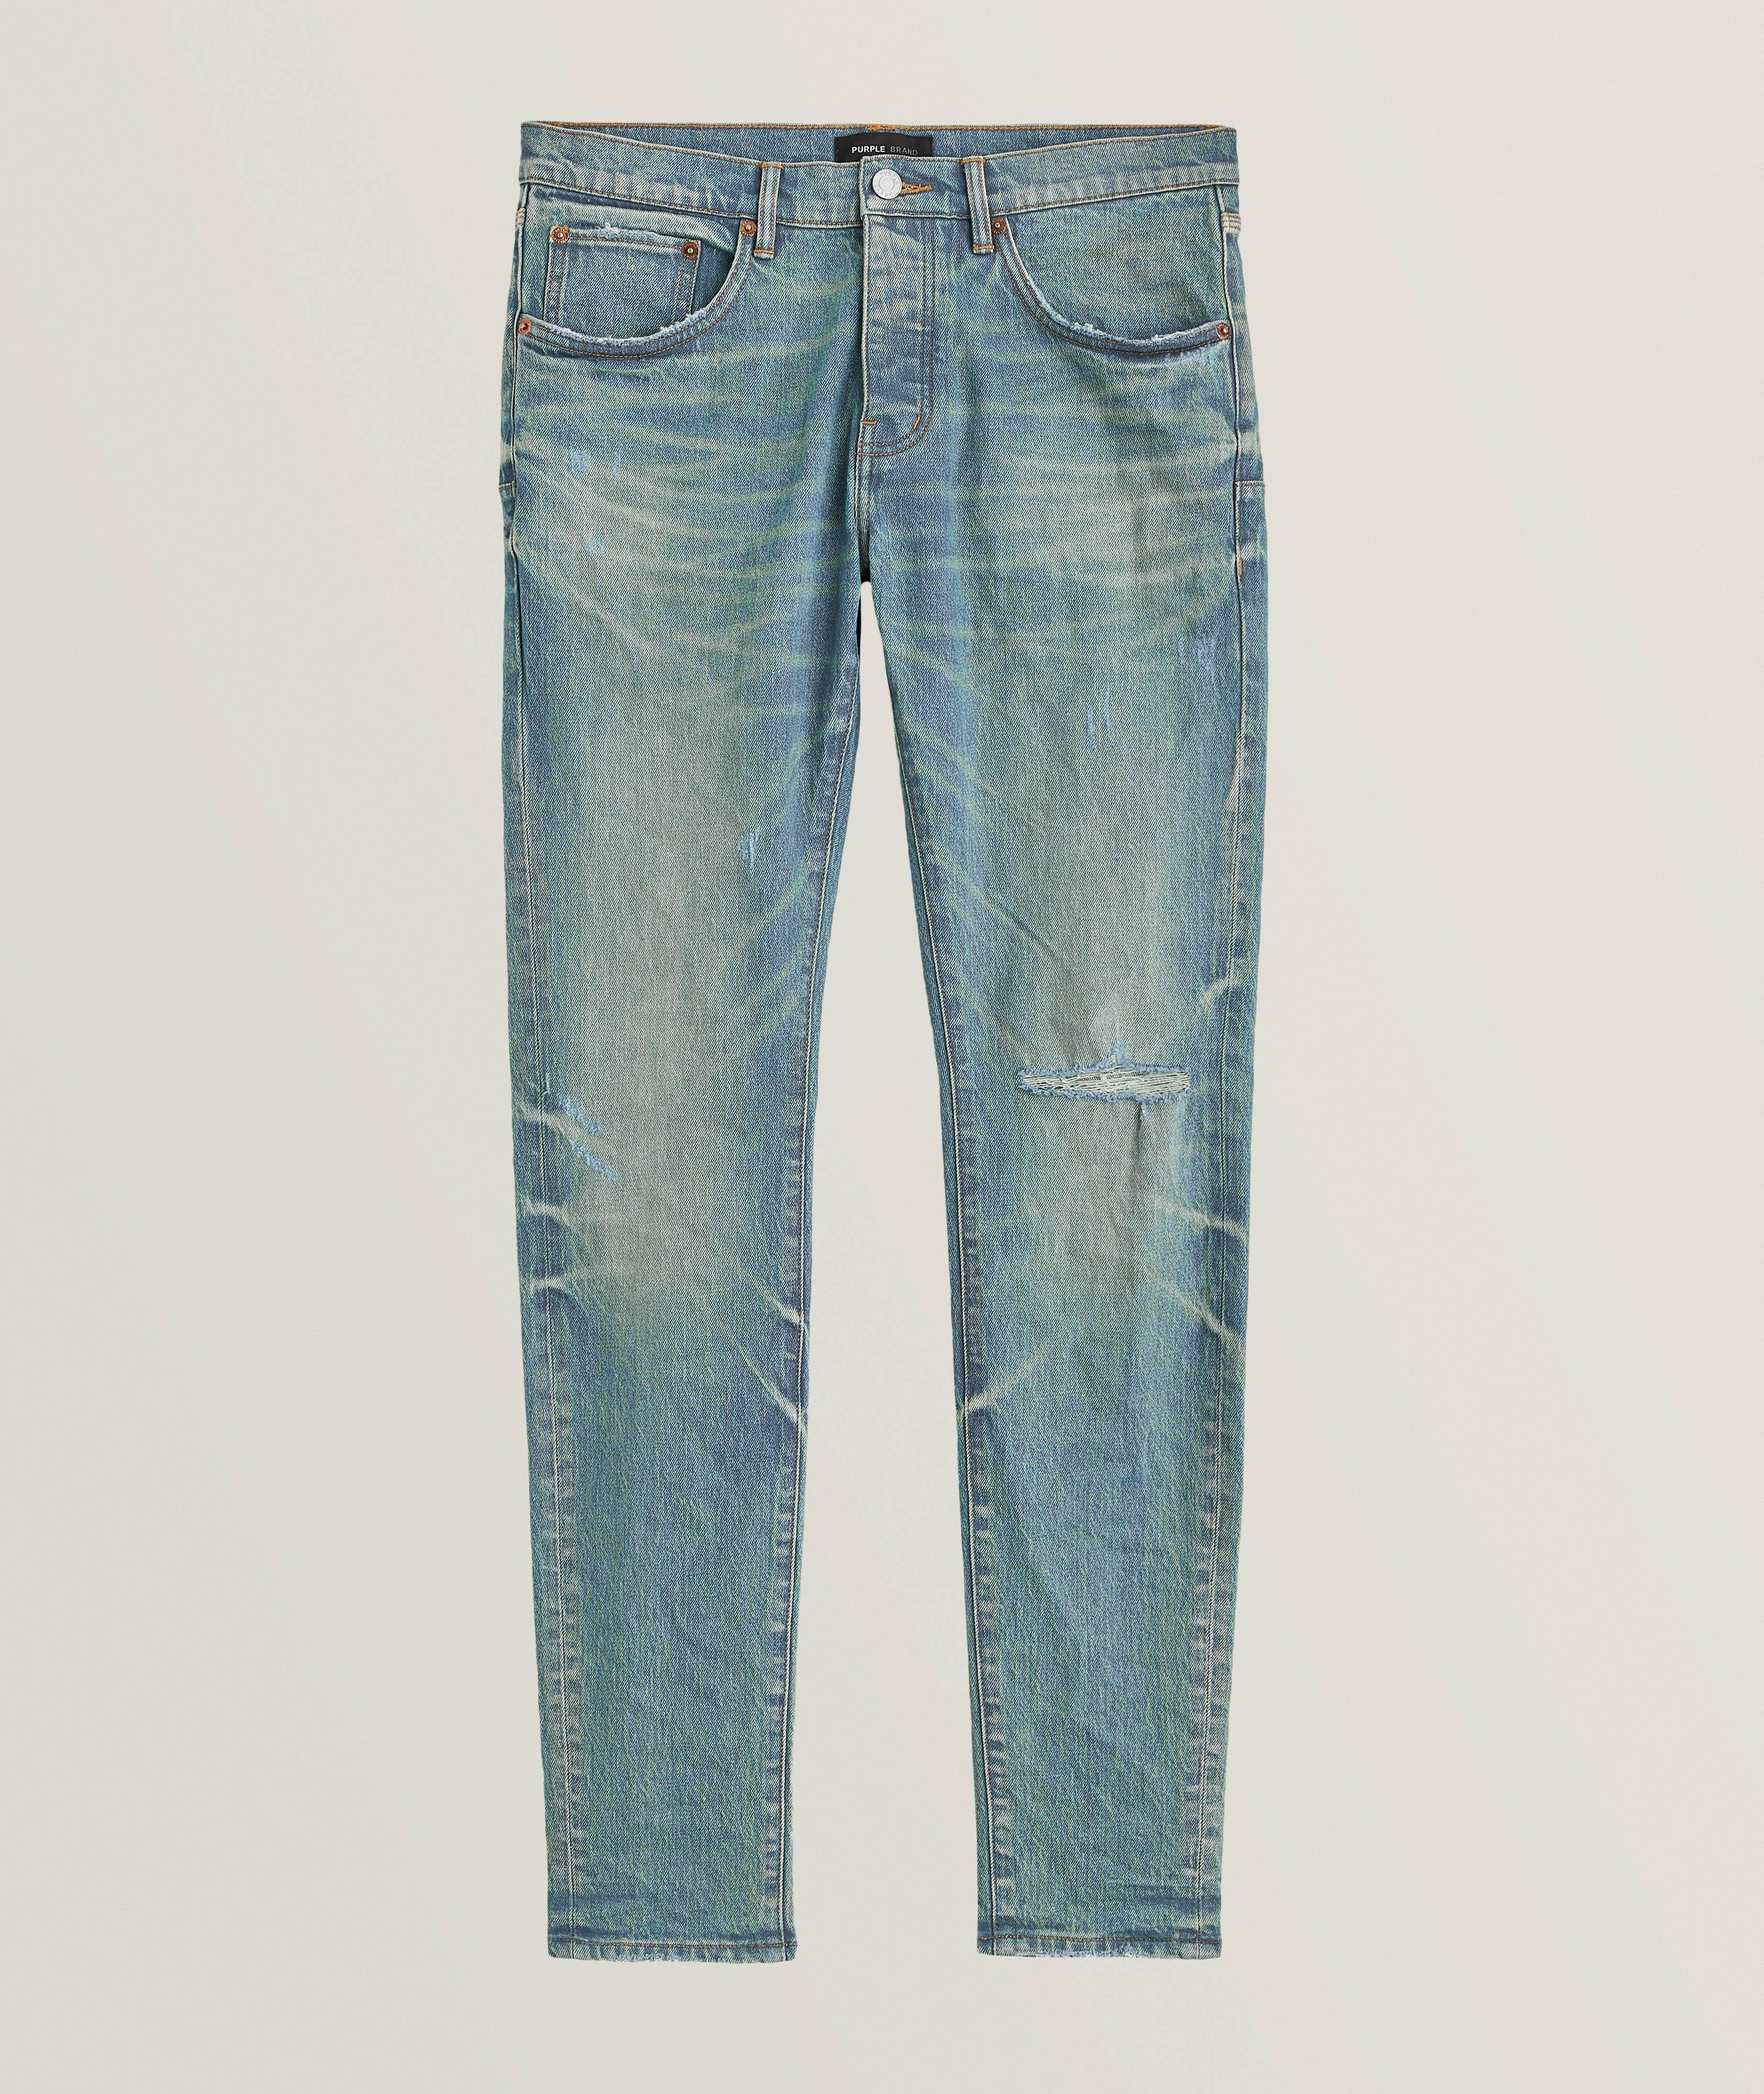 P001 Aged Ripped & Distressed Jeans  image 0